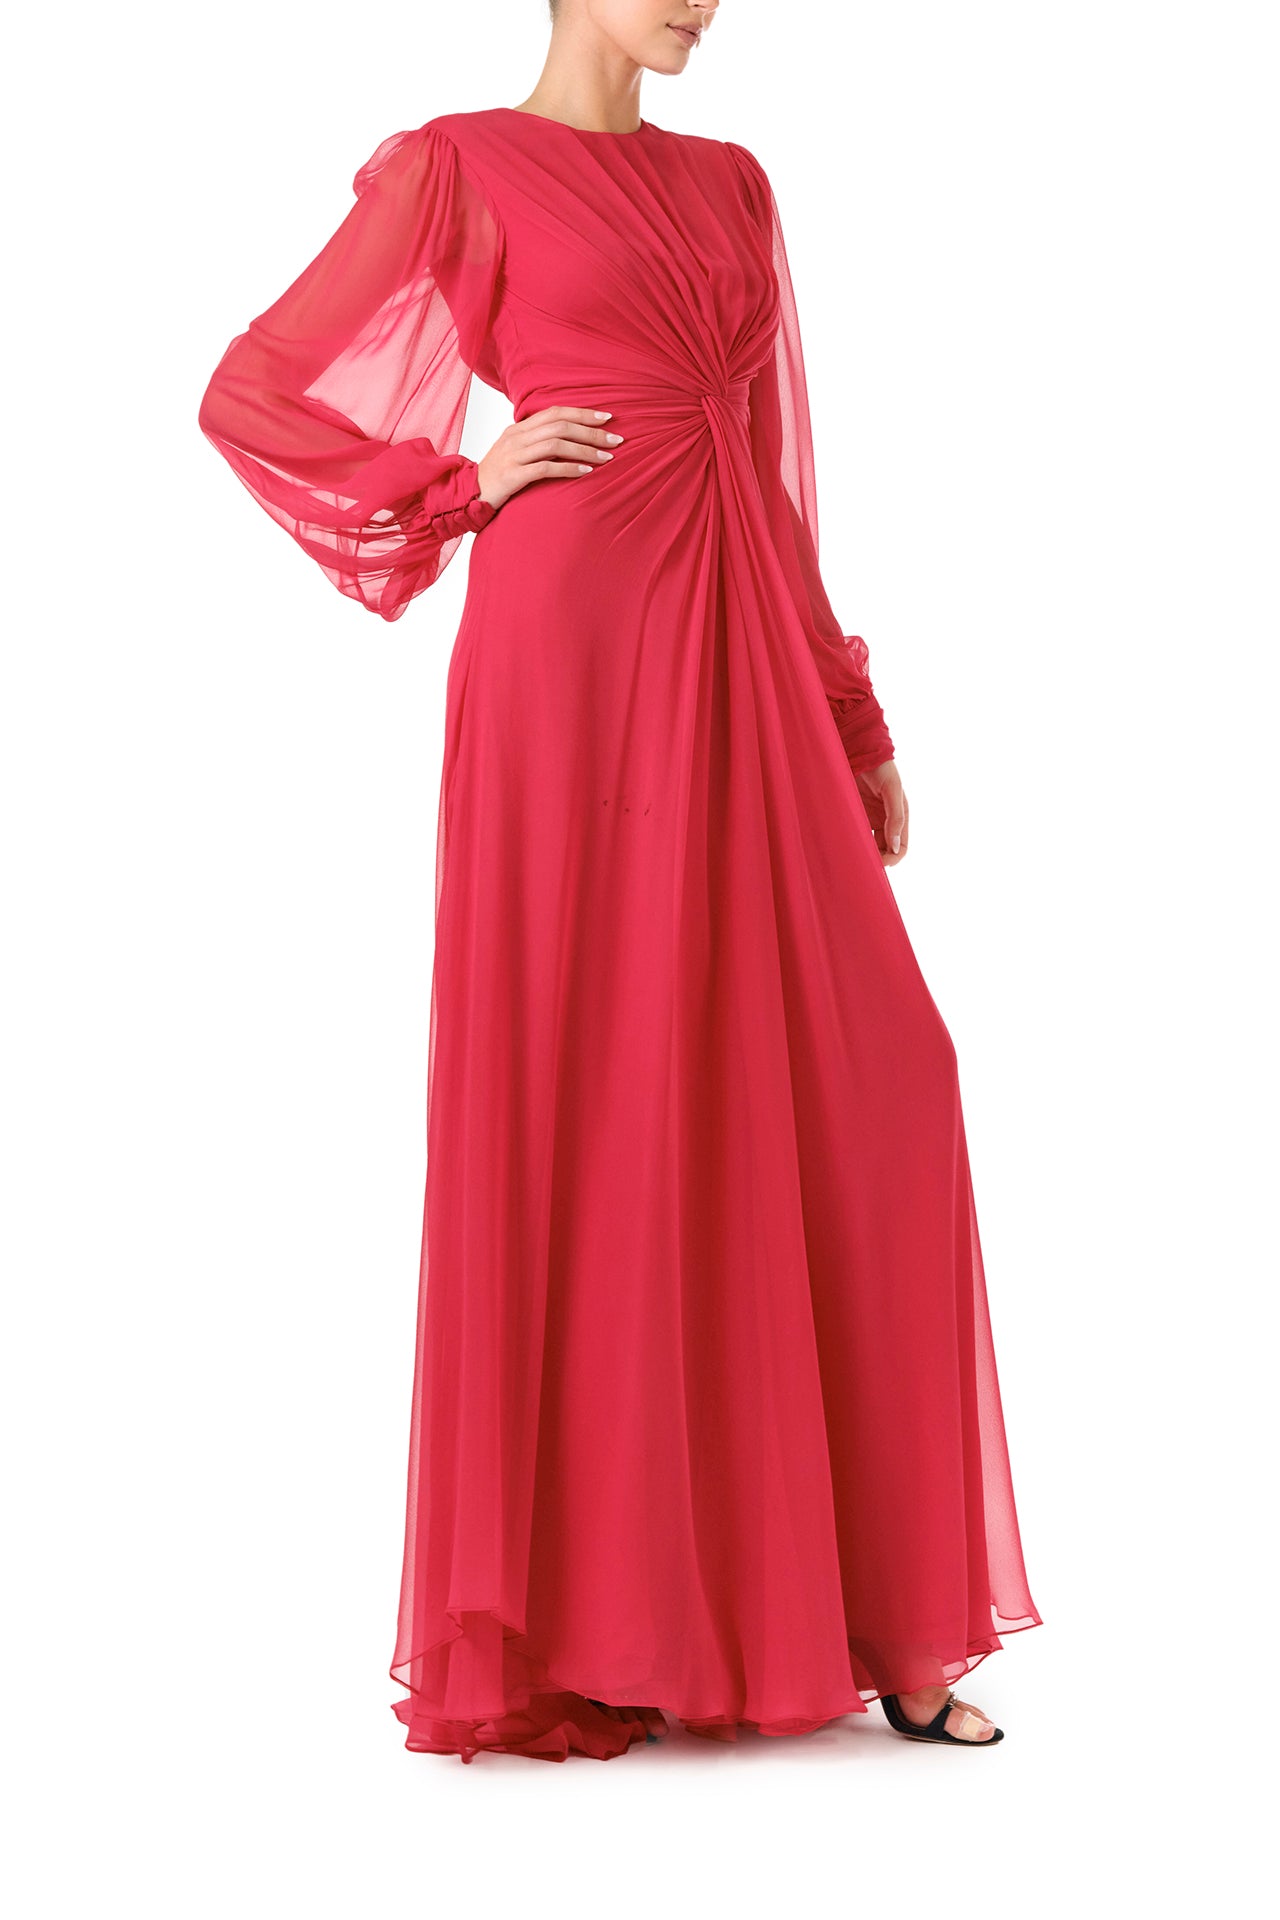 Monique Lhuillier Fall 2024 pomegranate chiffon, long sleeve gown with twist front detail, keyhole back and semi-sheer sleeves - right side.